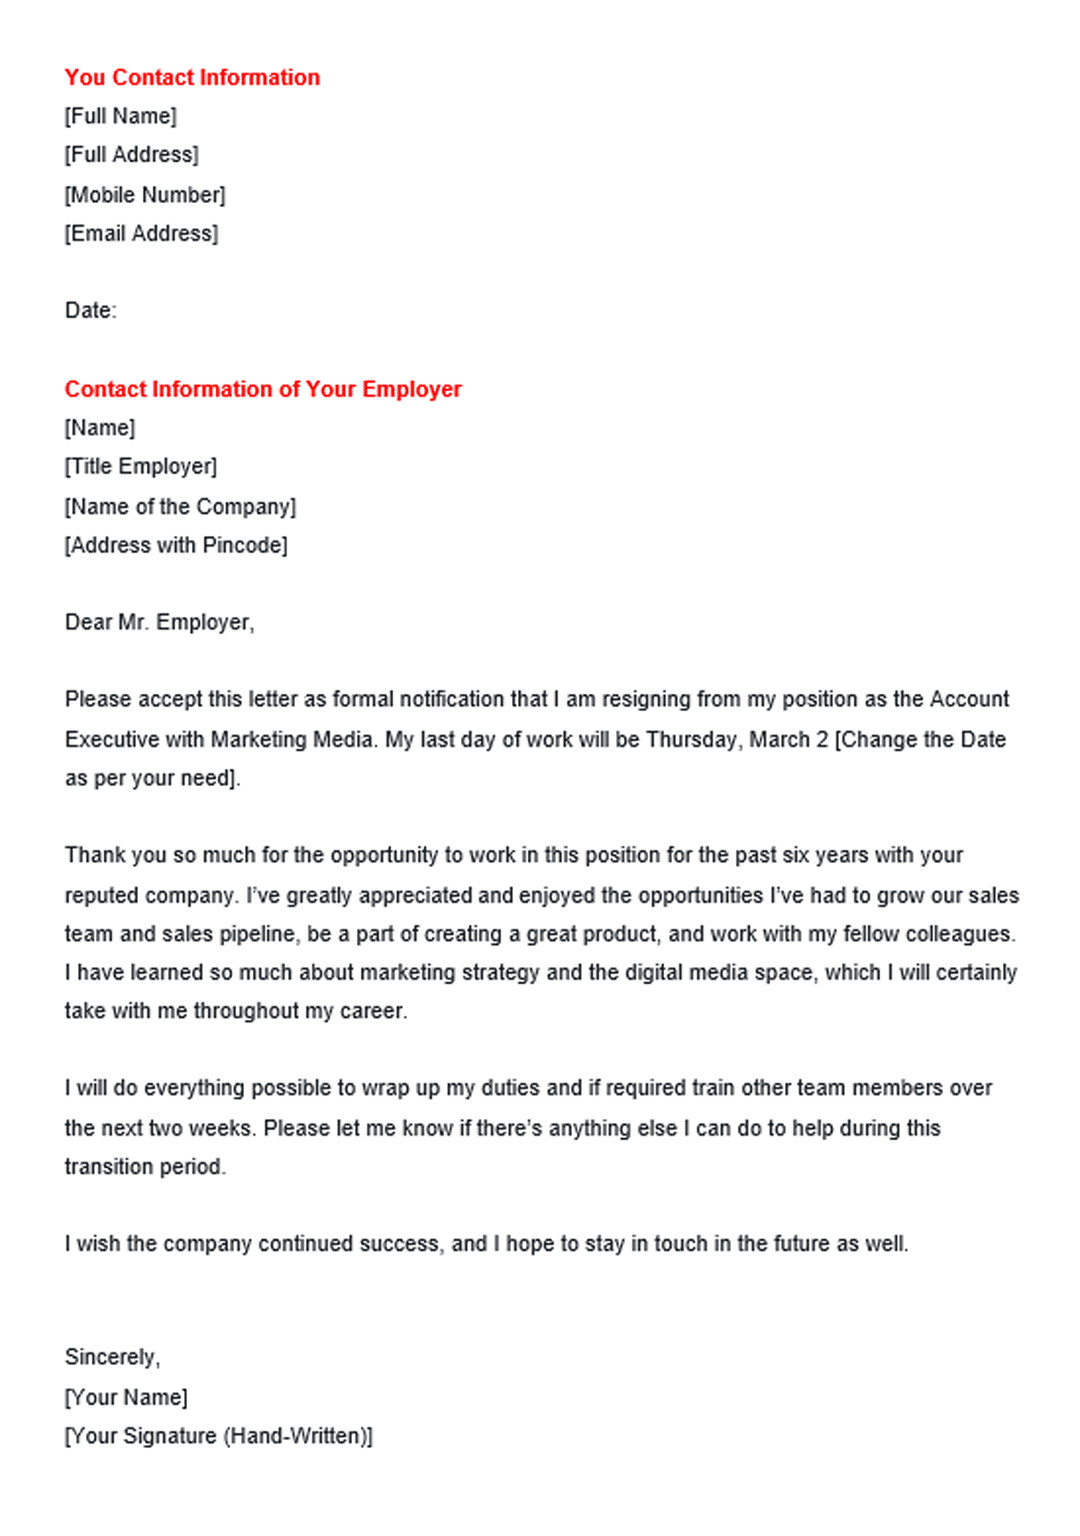 Resignation Letter Template Free Resignation Letter Samples How to Write A Professional